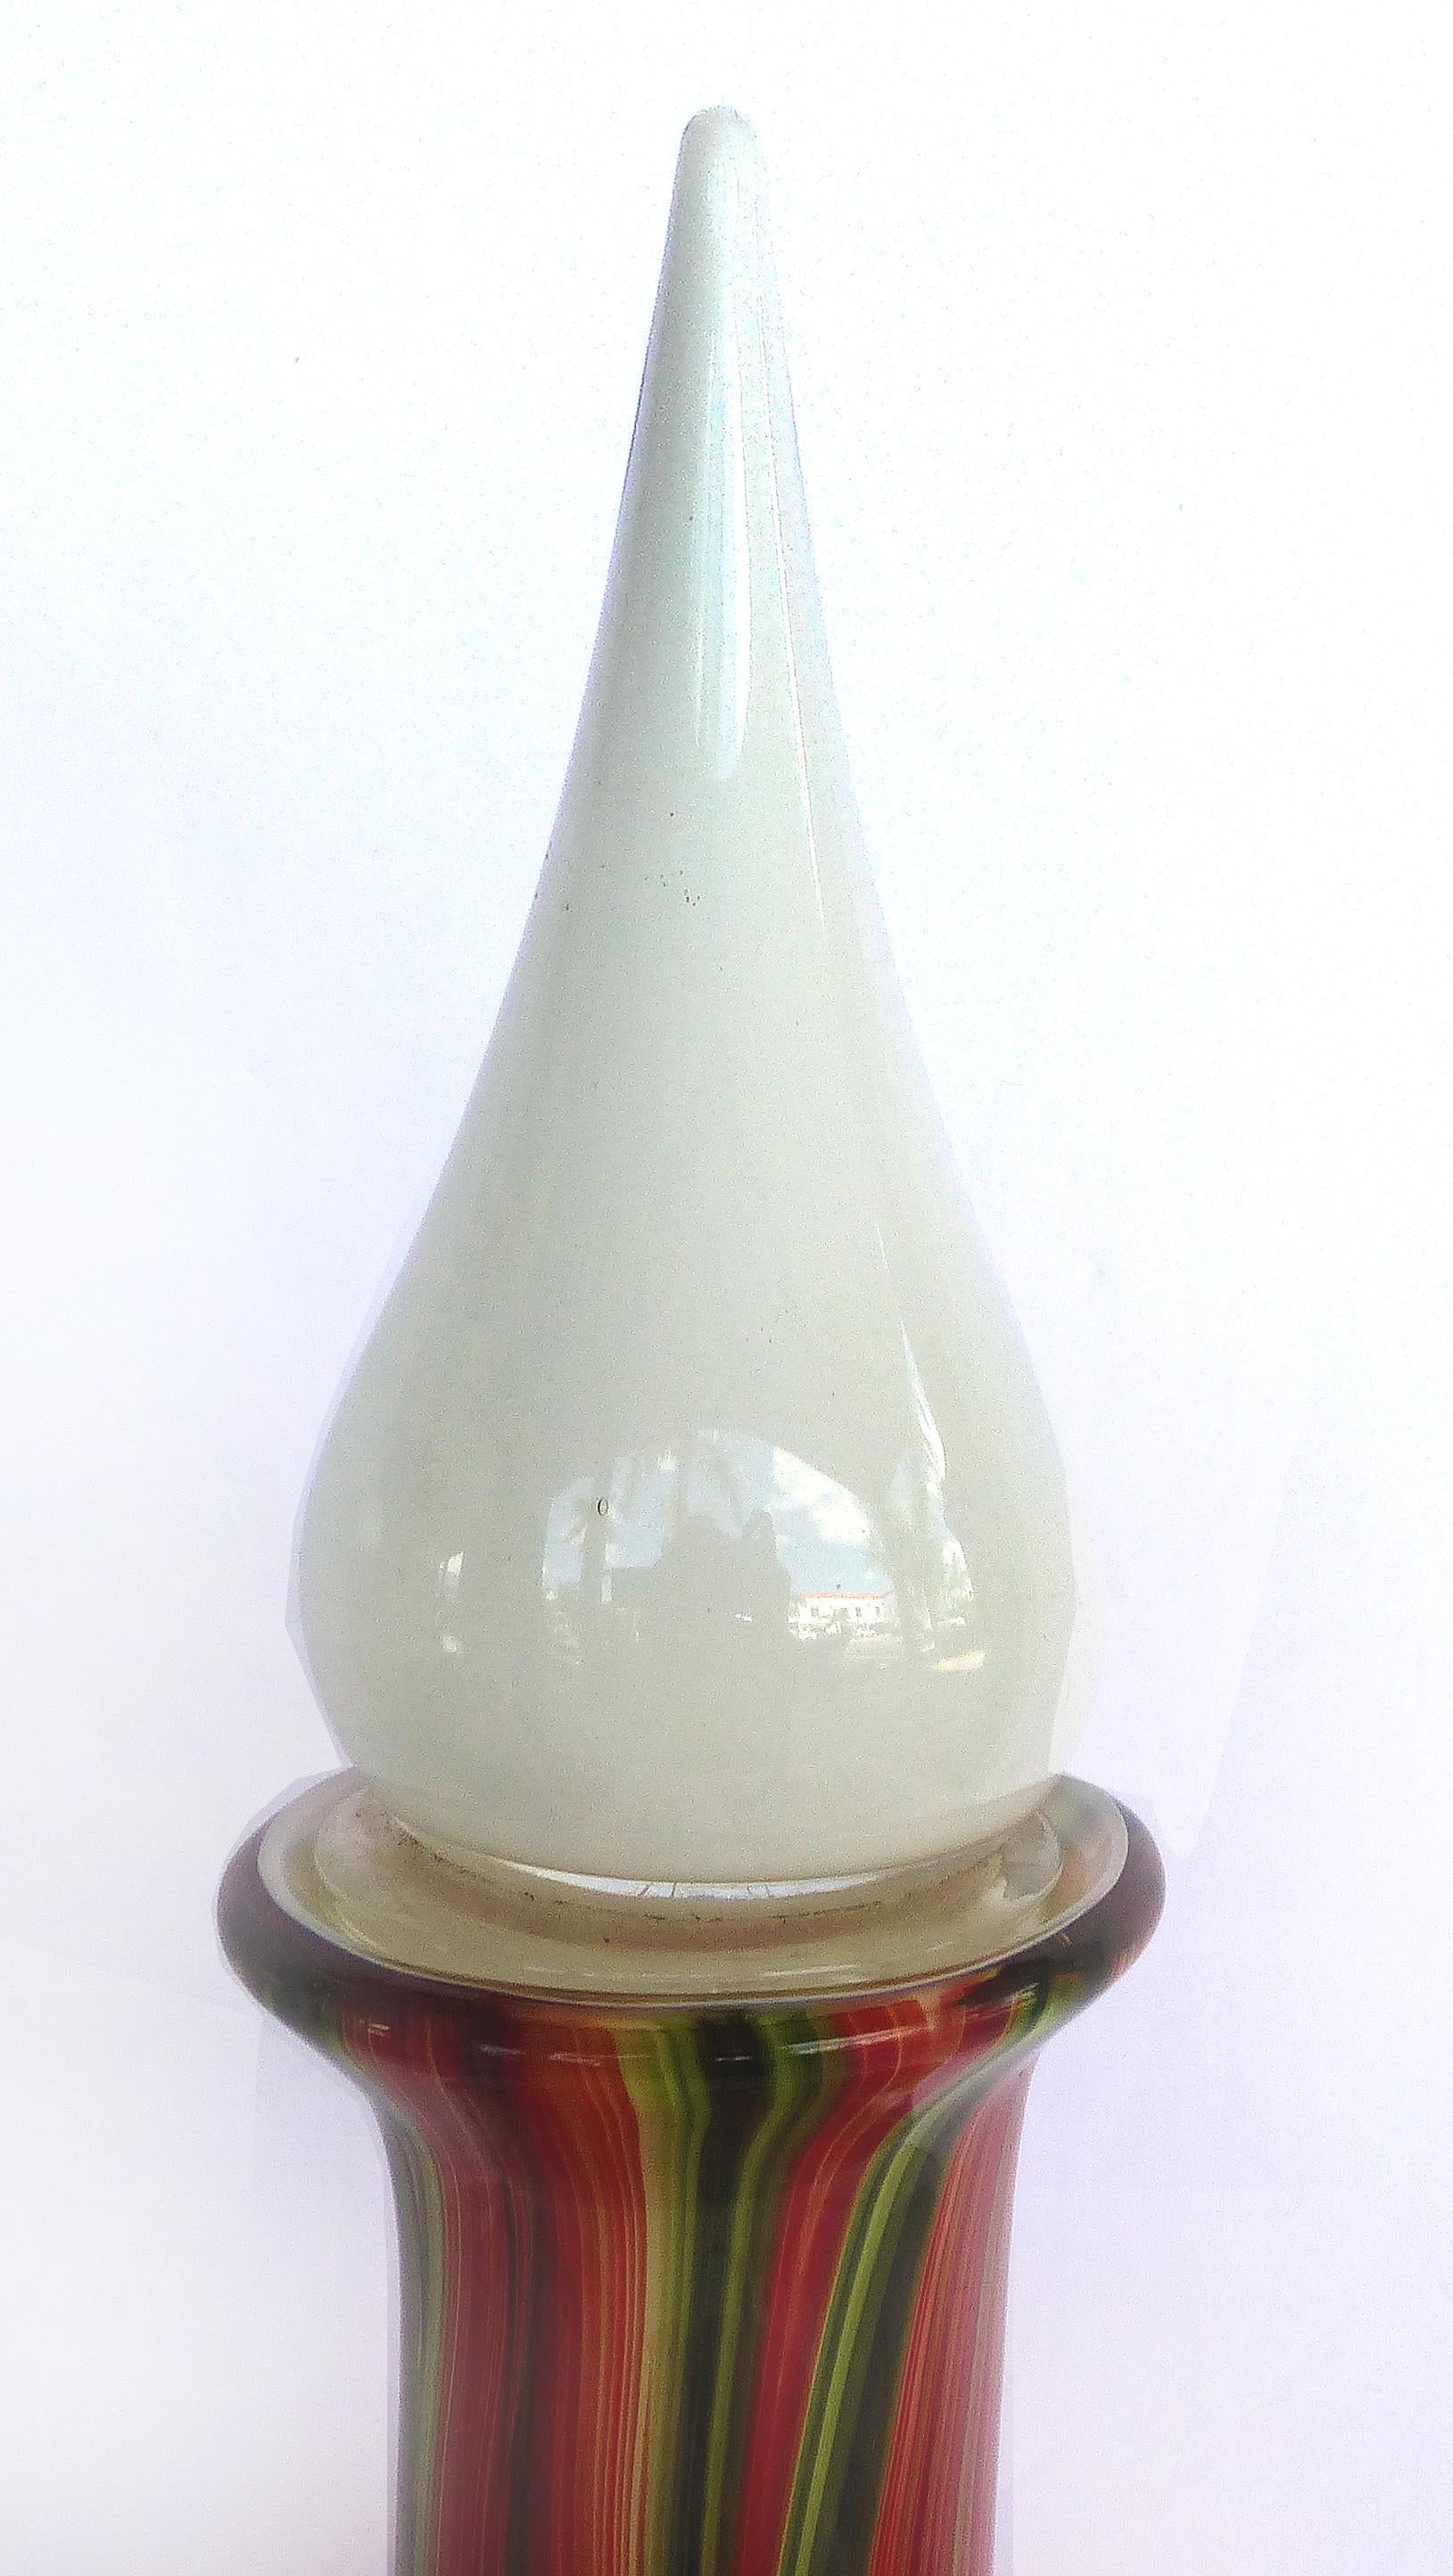 Large Hand Blown Glass Bottle with Stopper

Offered for sale is a large hand blown glass bottle with stopper. This large decorative bottle is brightly colored with red, green and orange stripes and a white milk glass stopper.